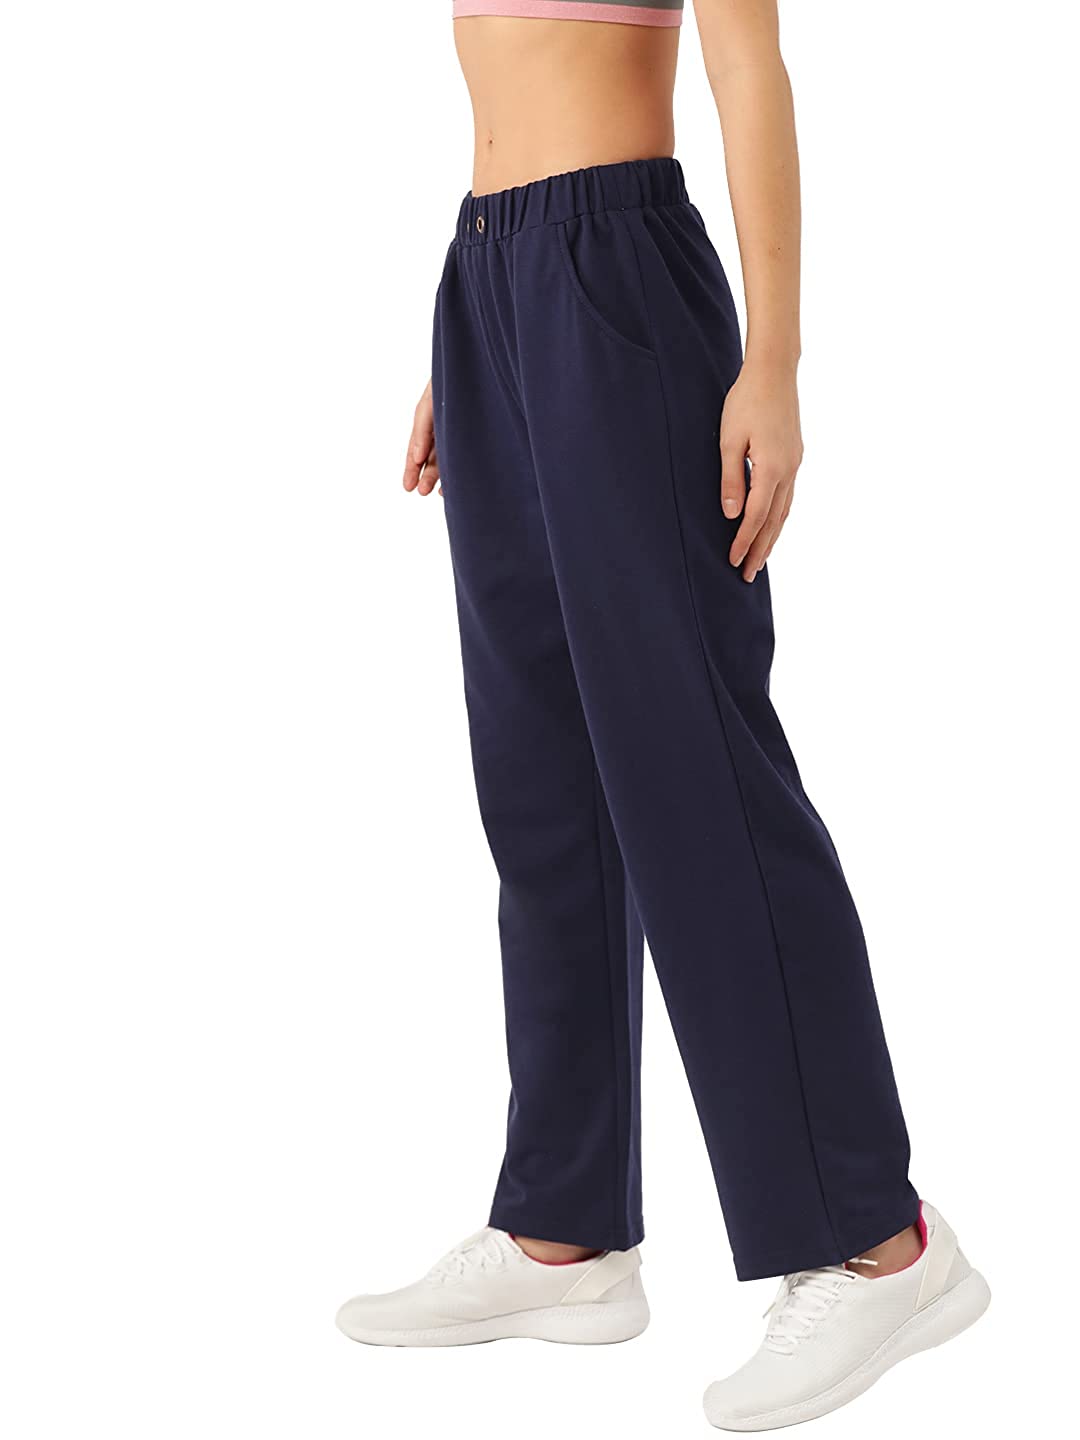 Athleisure Track Pants for Women: Buy Athleisure Track Pants for